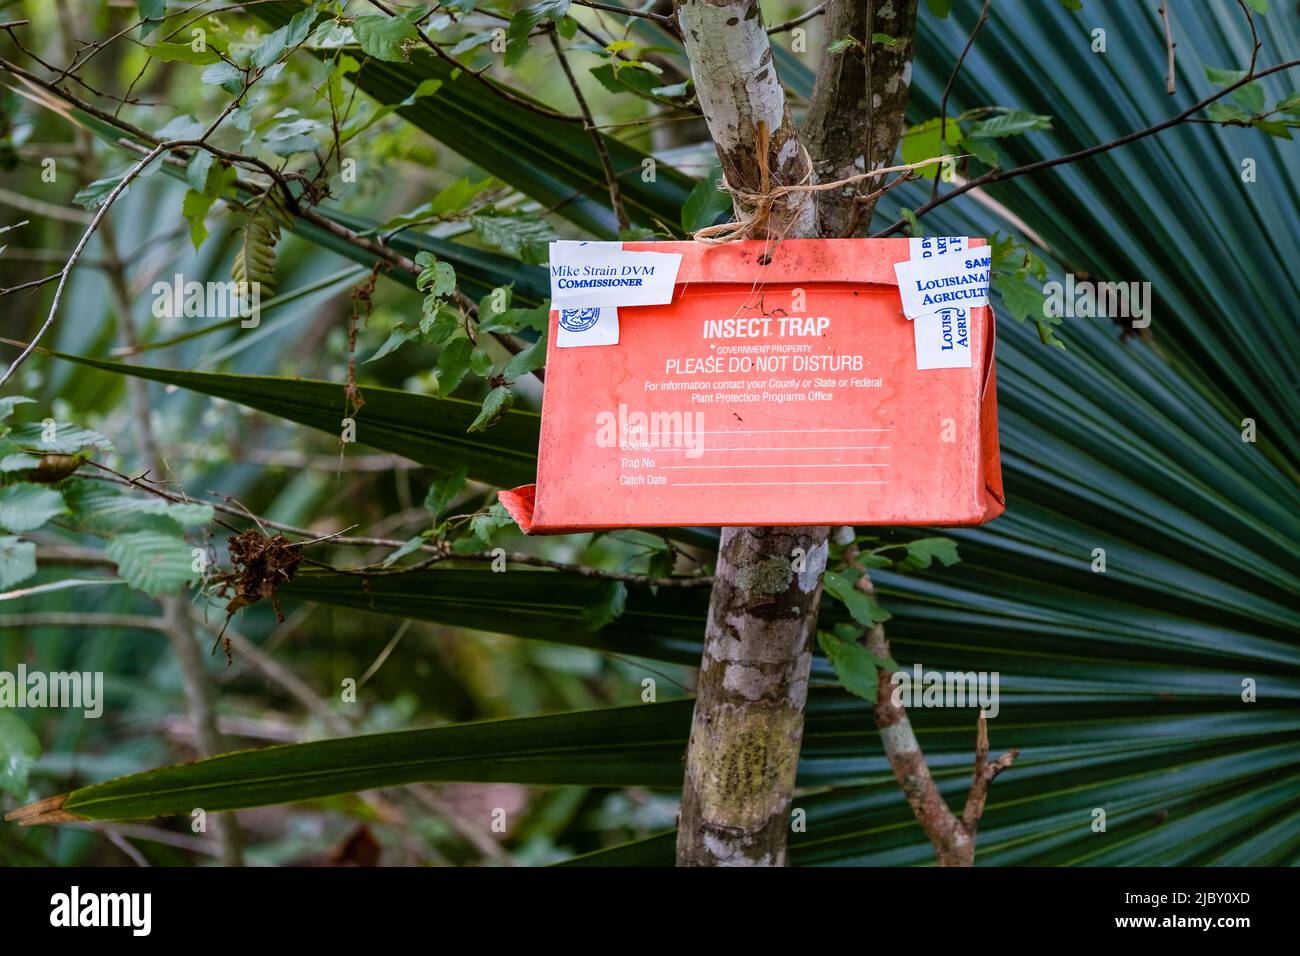 PALMETTO ISLAND, LA, USA - JUNE 4, 2022: Insect trap belonging to Louisiana Department of Agriculture tied to a tree in Palmetto Island State Park Stock Photo